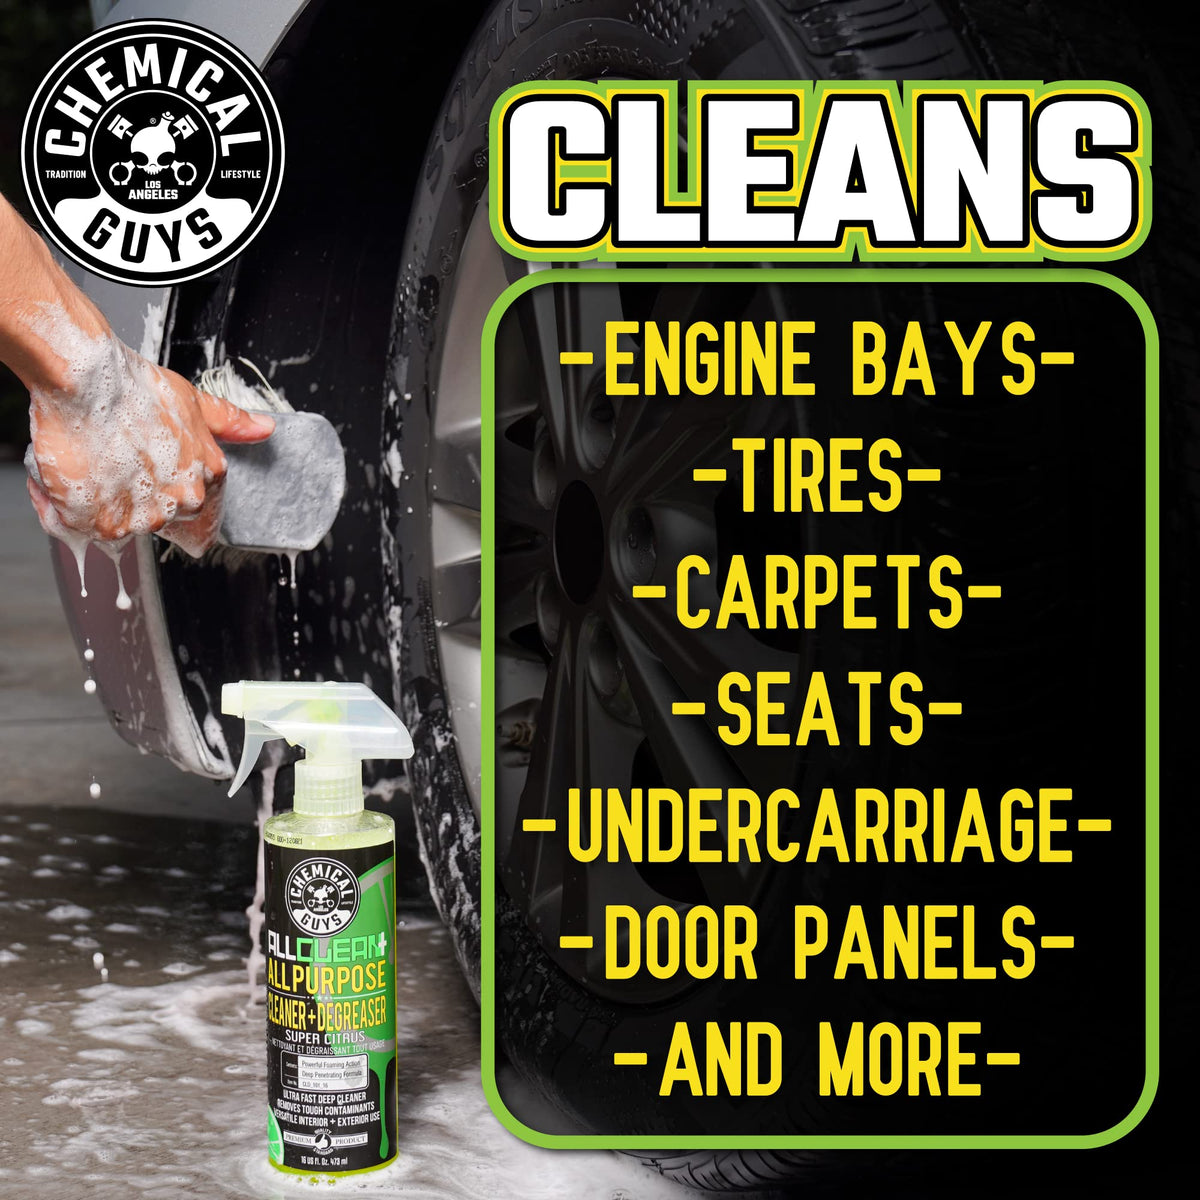 Chemical Guys Citrus Wash And Gloss Concentrated Ultra Premium